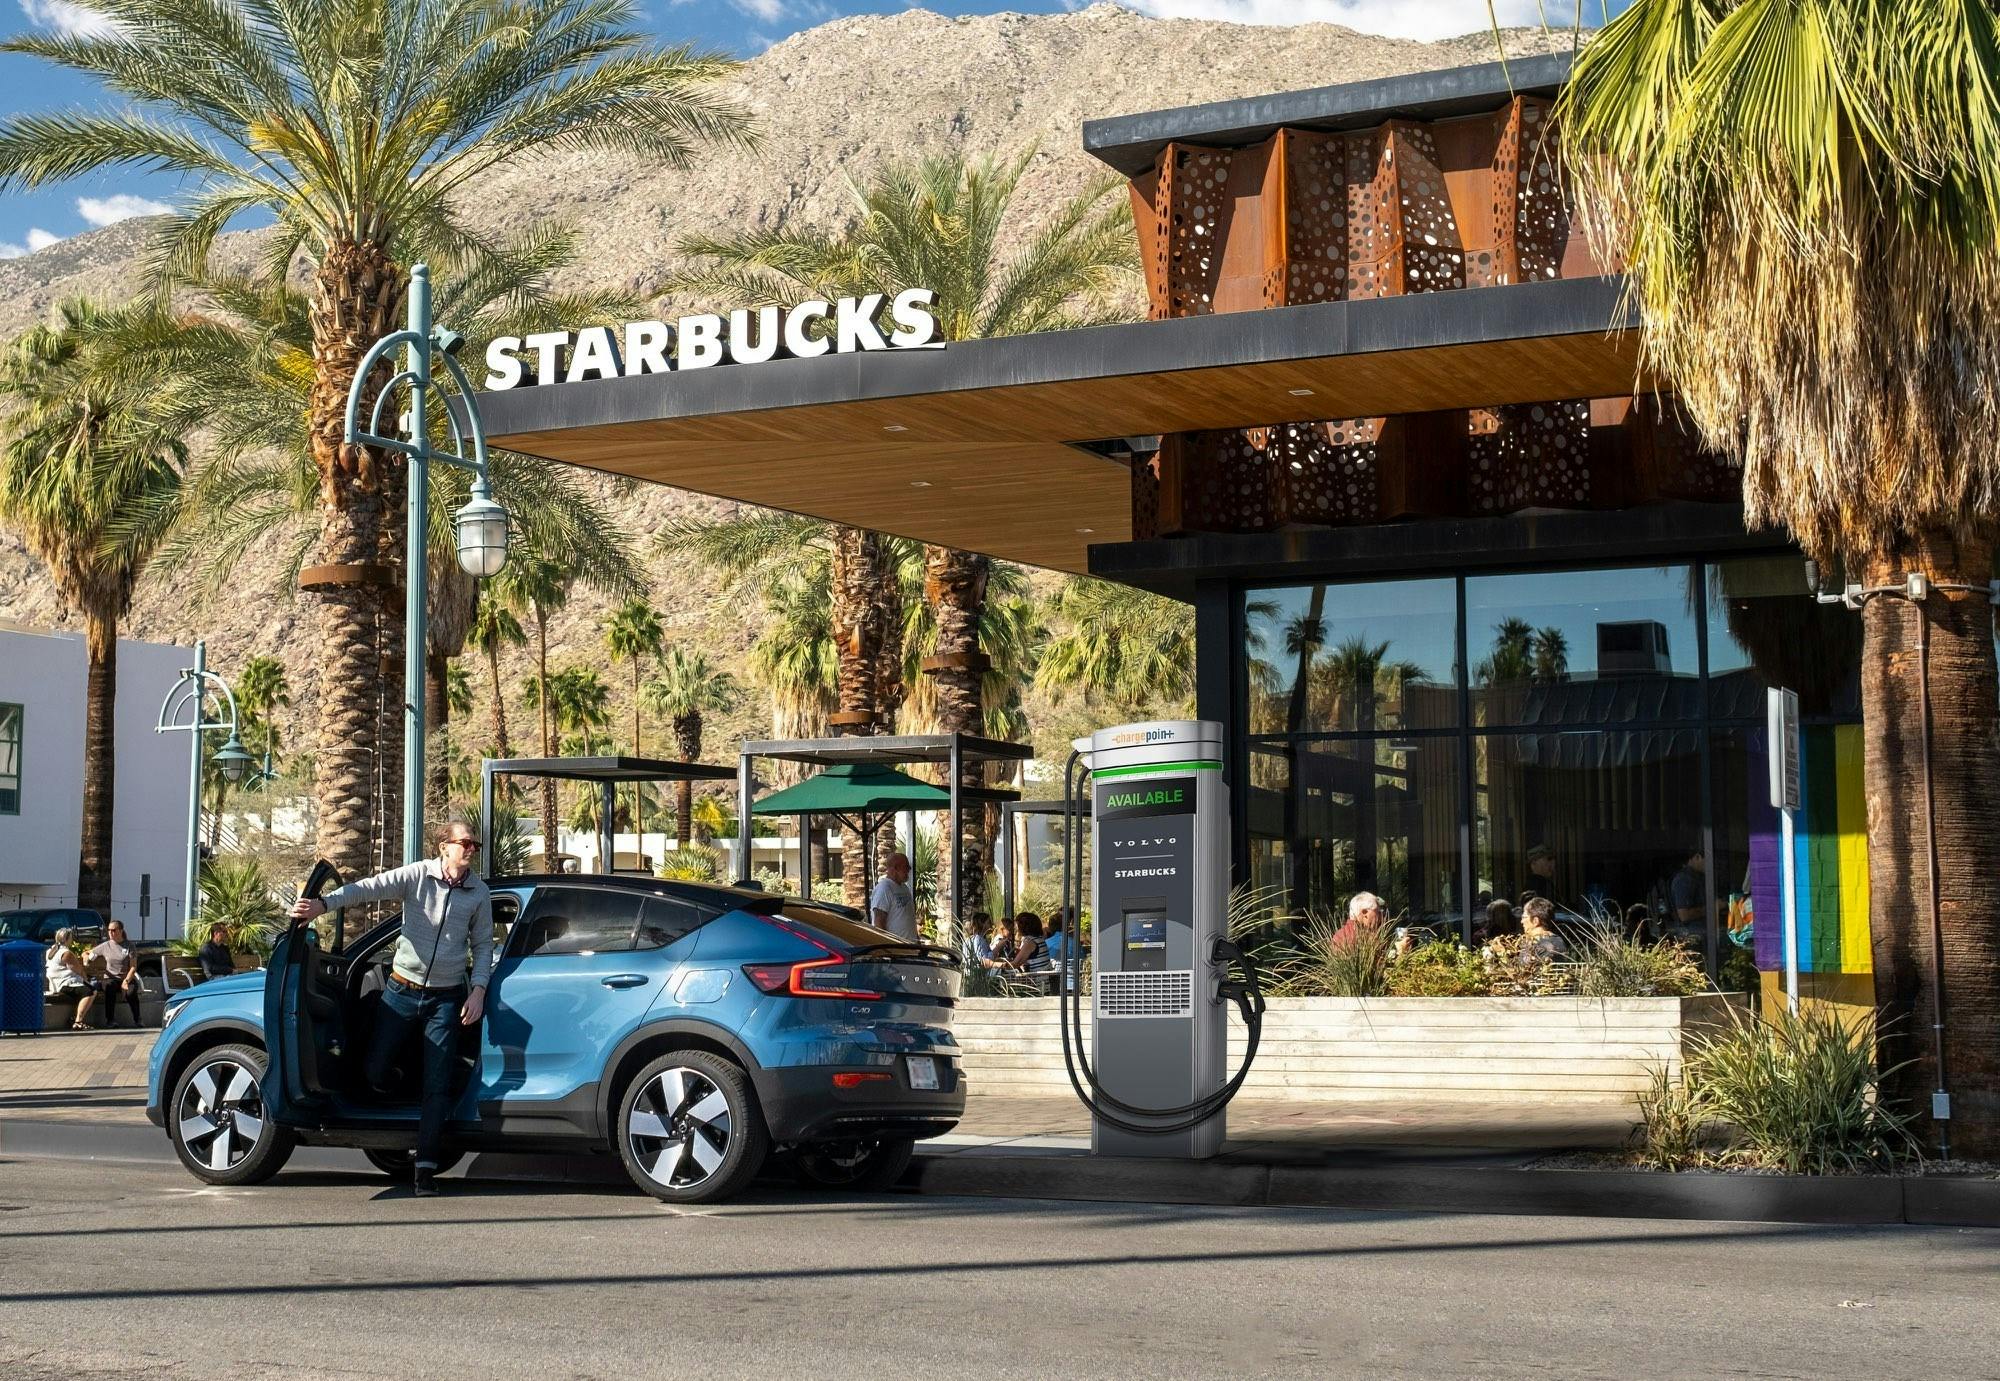 Volvo C40 Recharge EV at Starbucks using special charging location